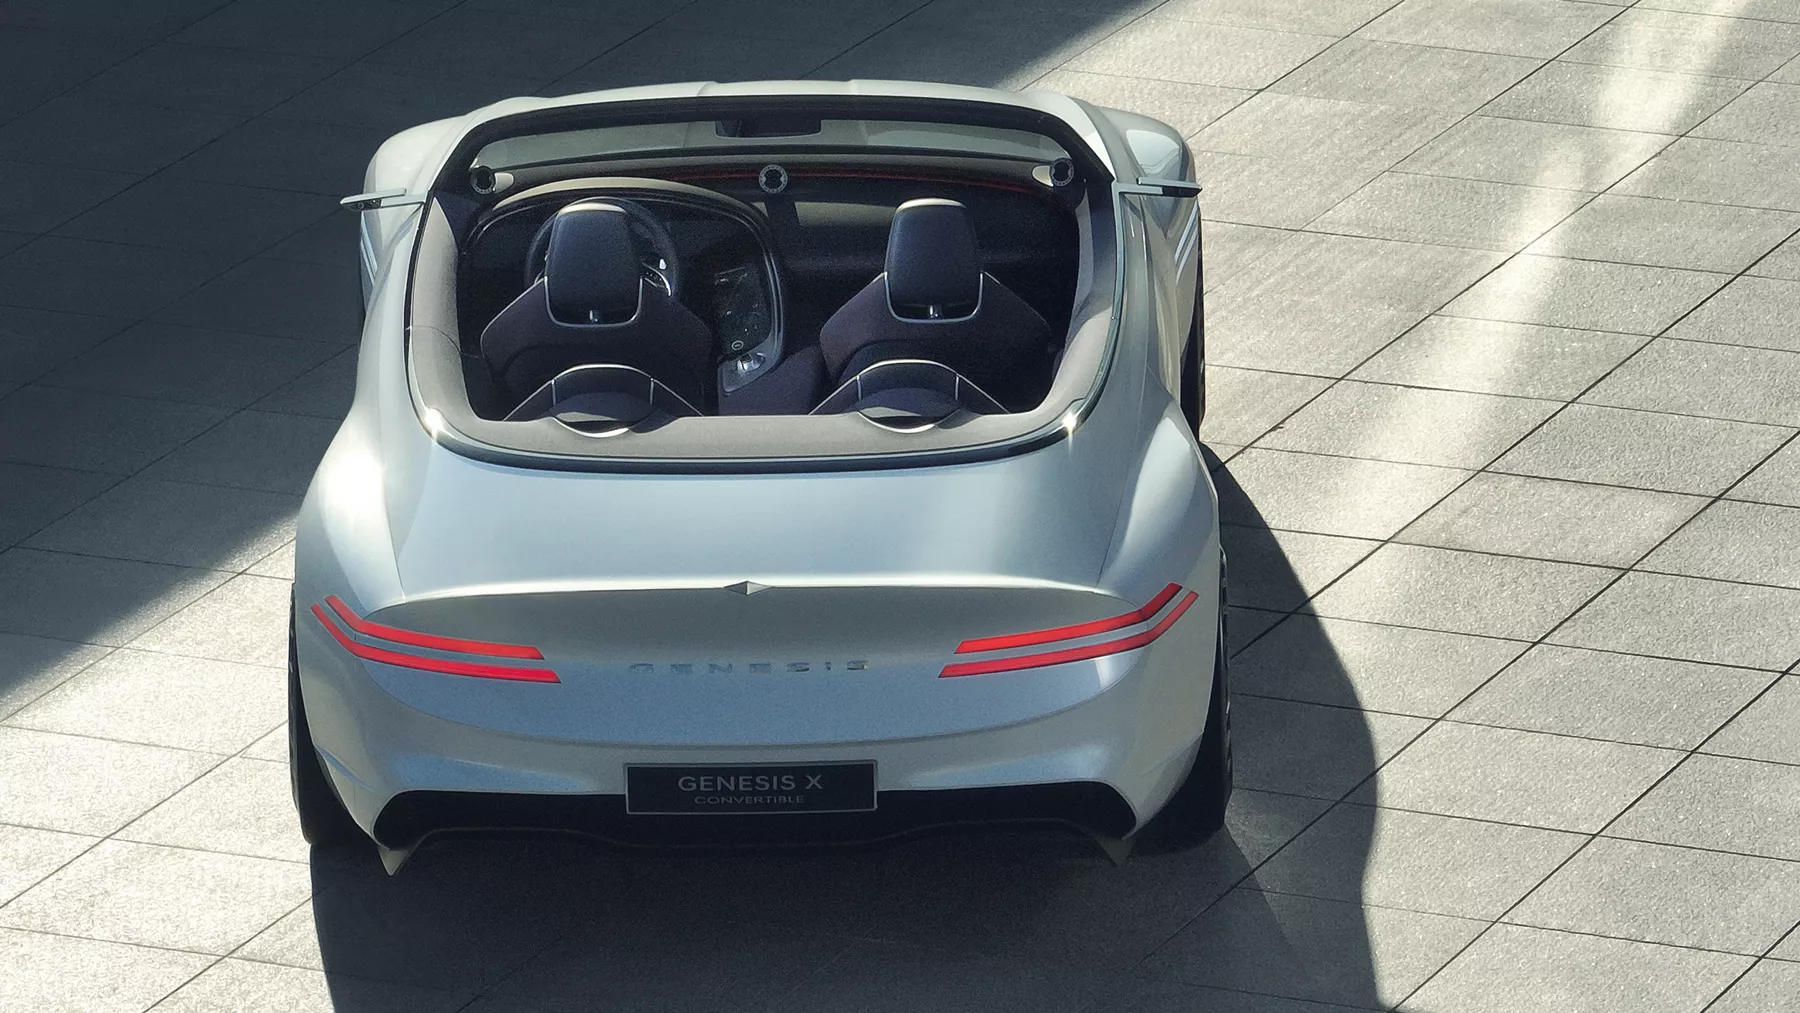 Rear view of X Convertible Concept with taillight illuminated.